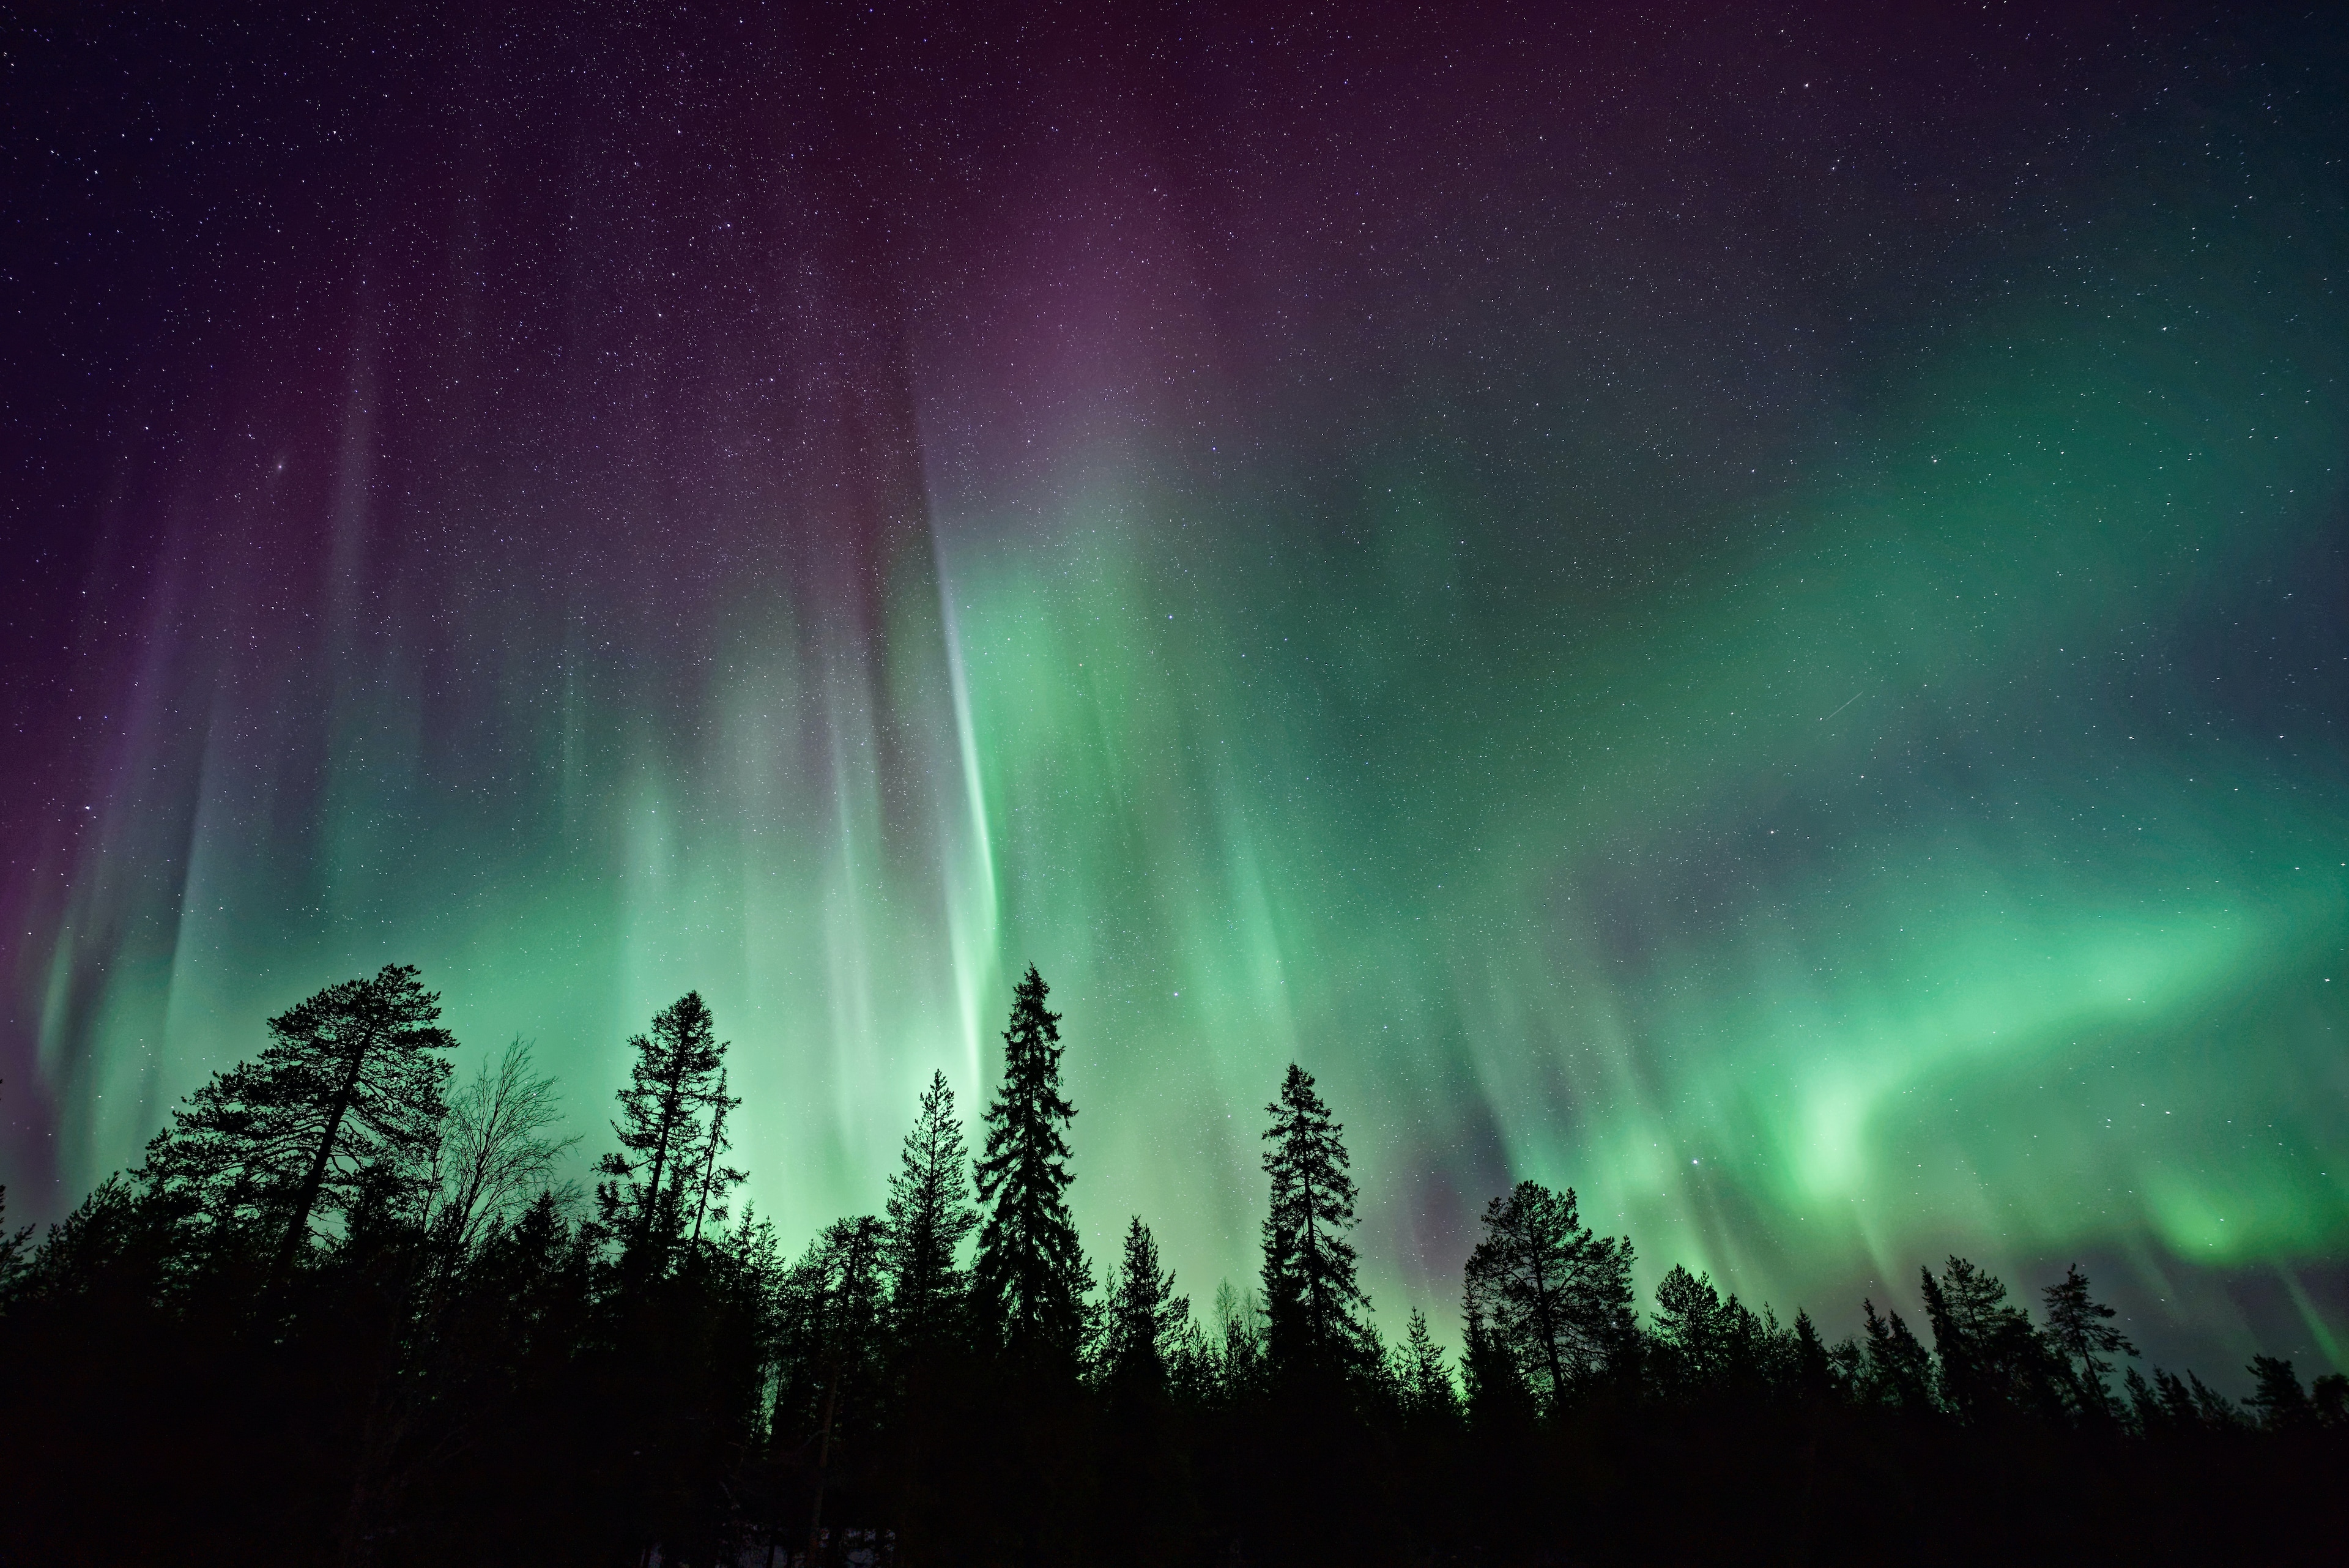 An Unforgettable Experience: Seeing The Northern Lights in Alaska